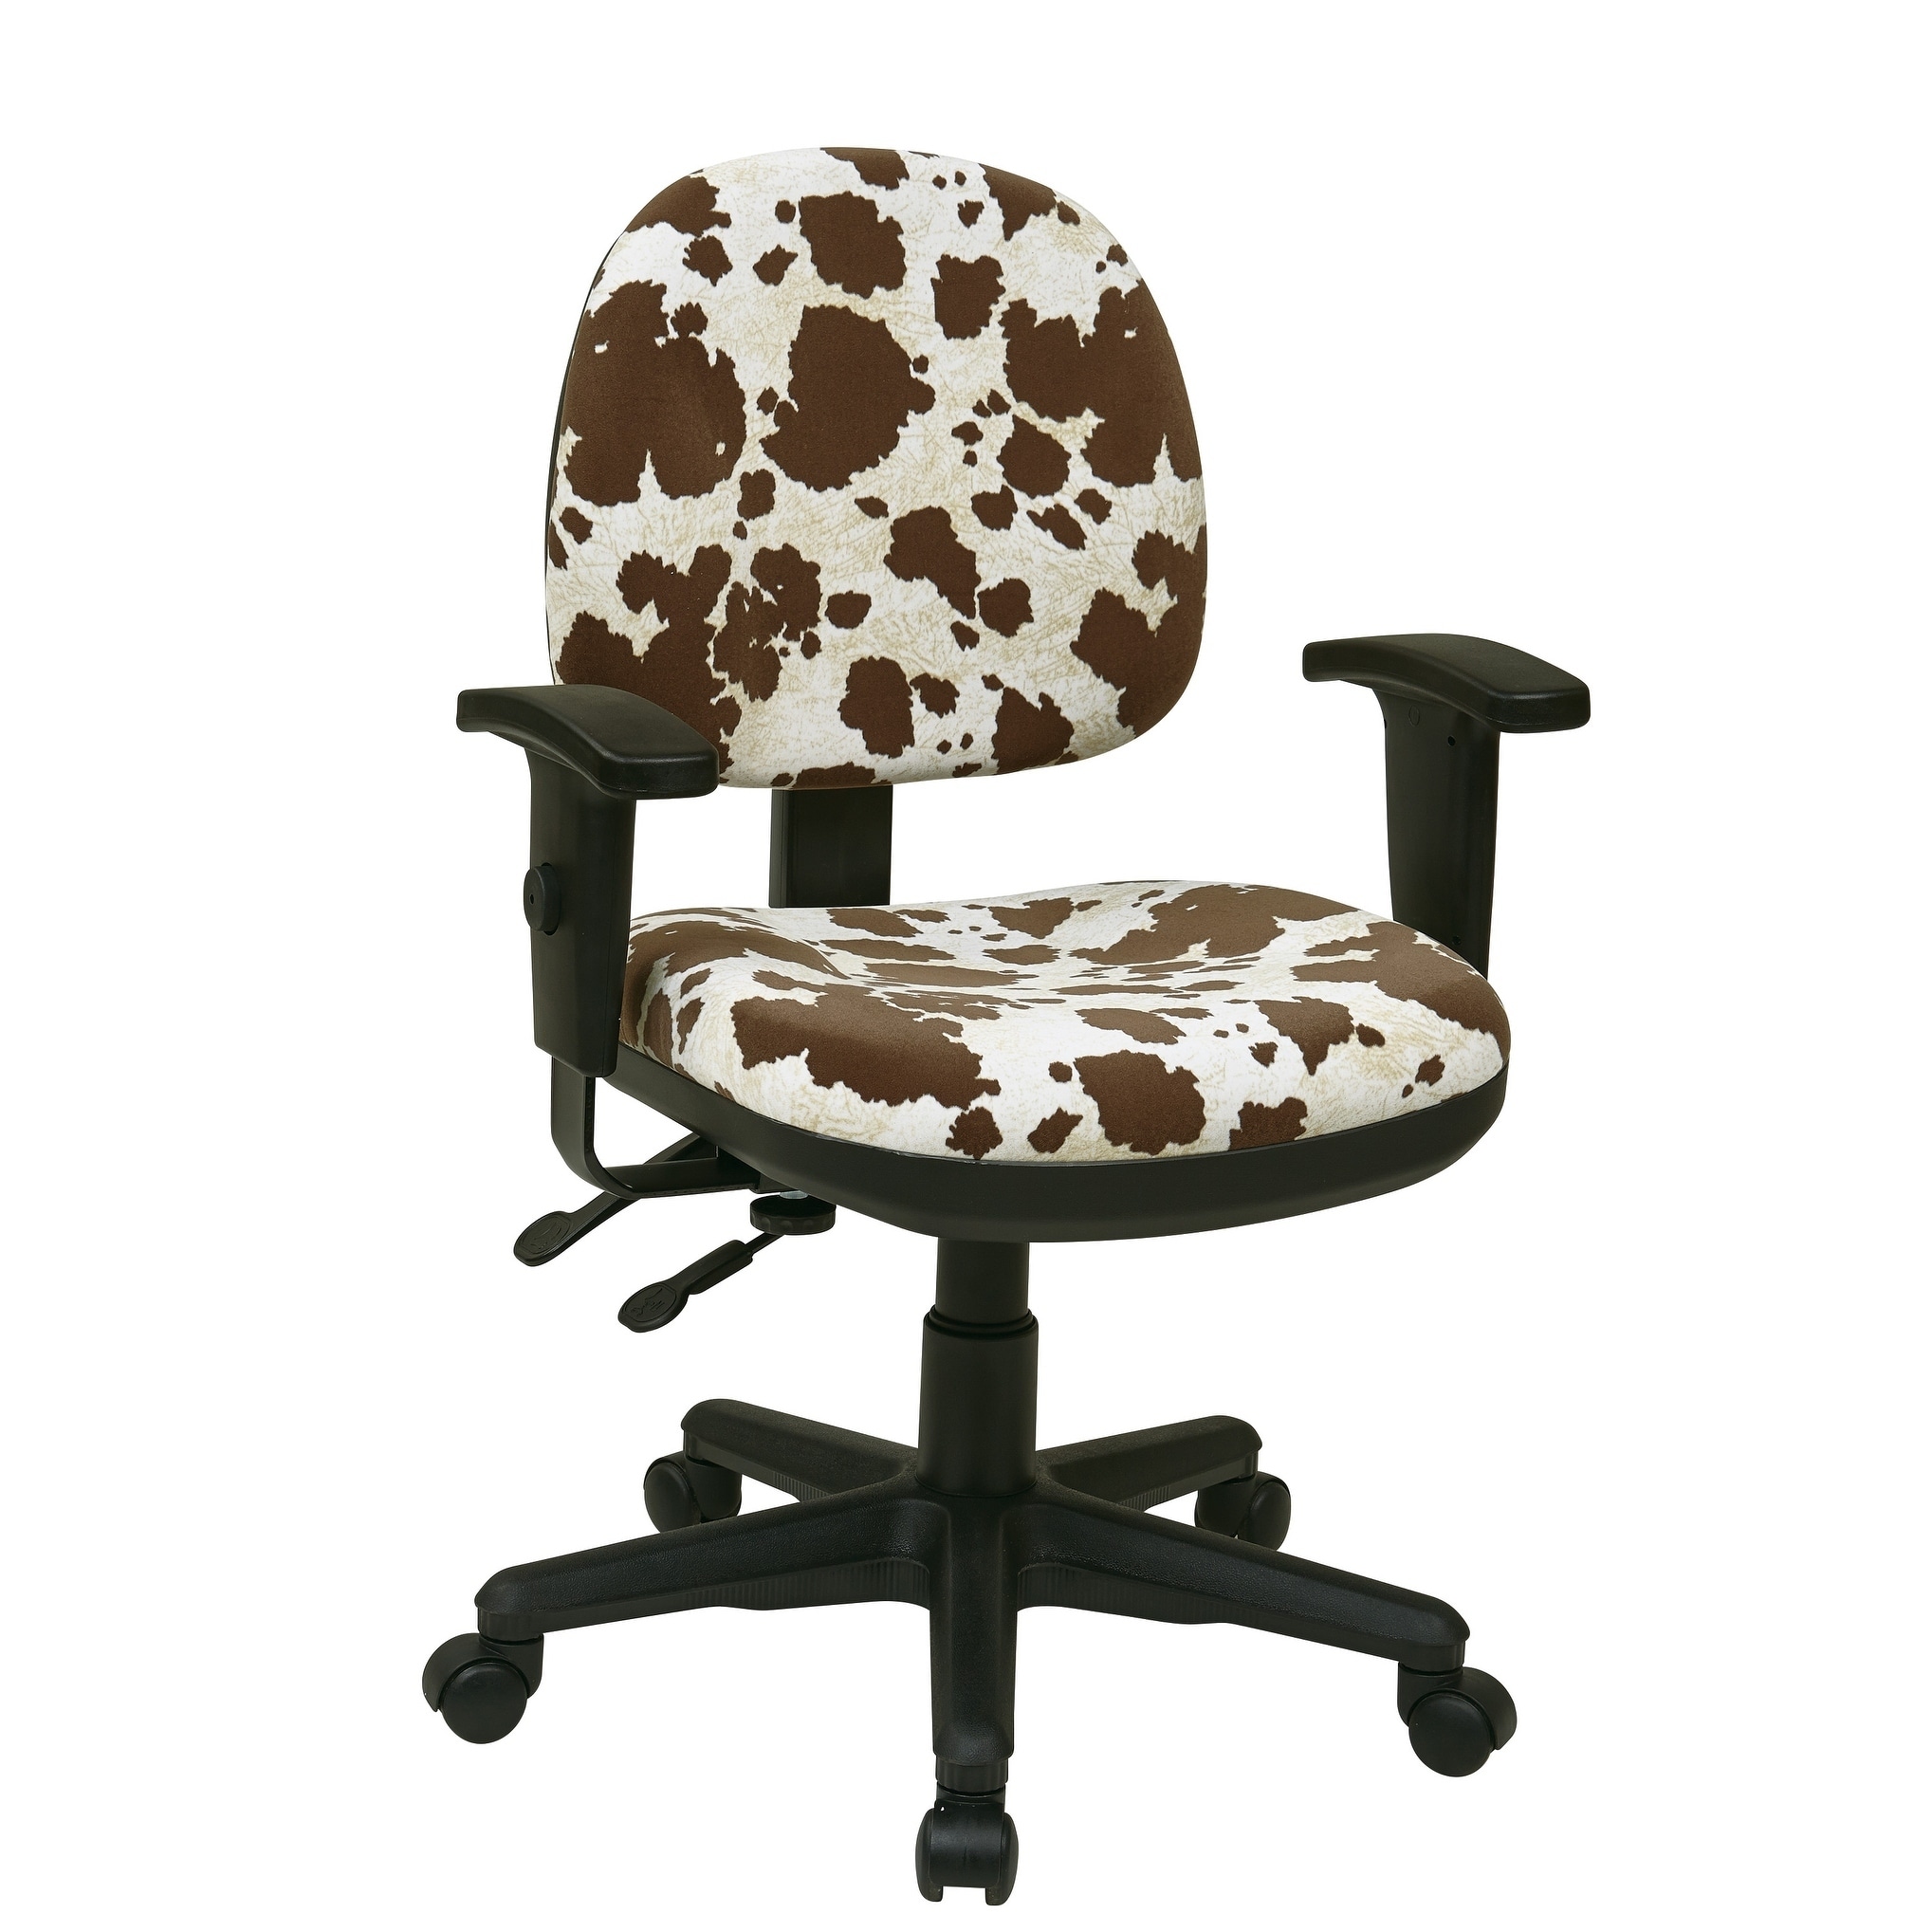 Animal Print Multi Controlled Sculpted Chair With Arms Overstock 7707264